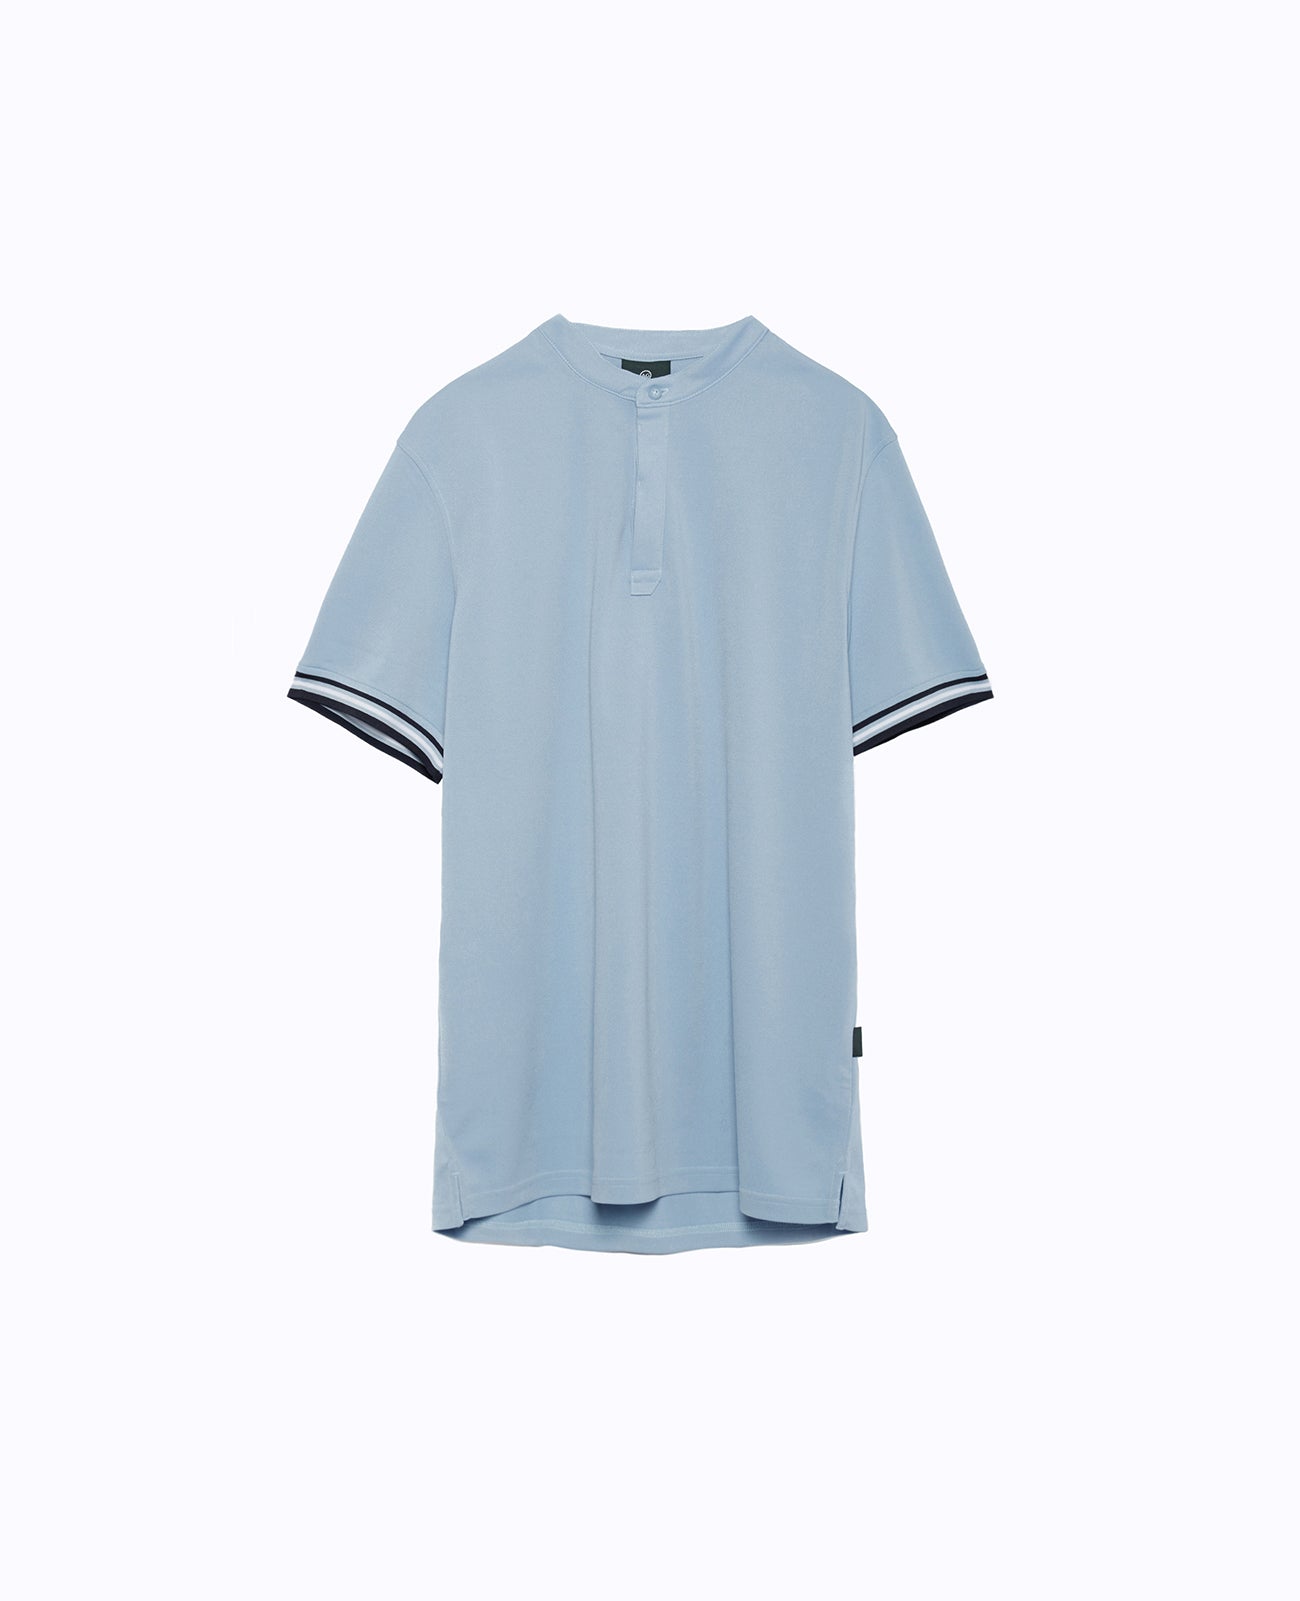 Haskett Polo Clear Sky Green Label Collection Men Tops Photo 6